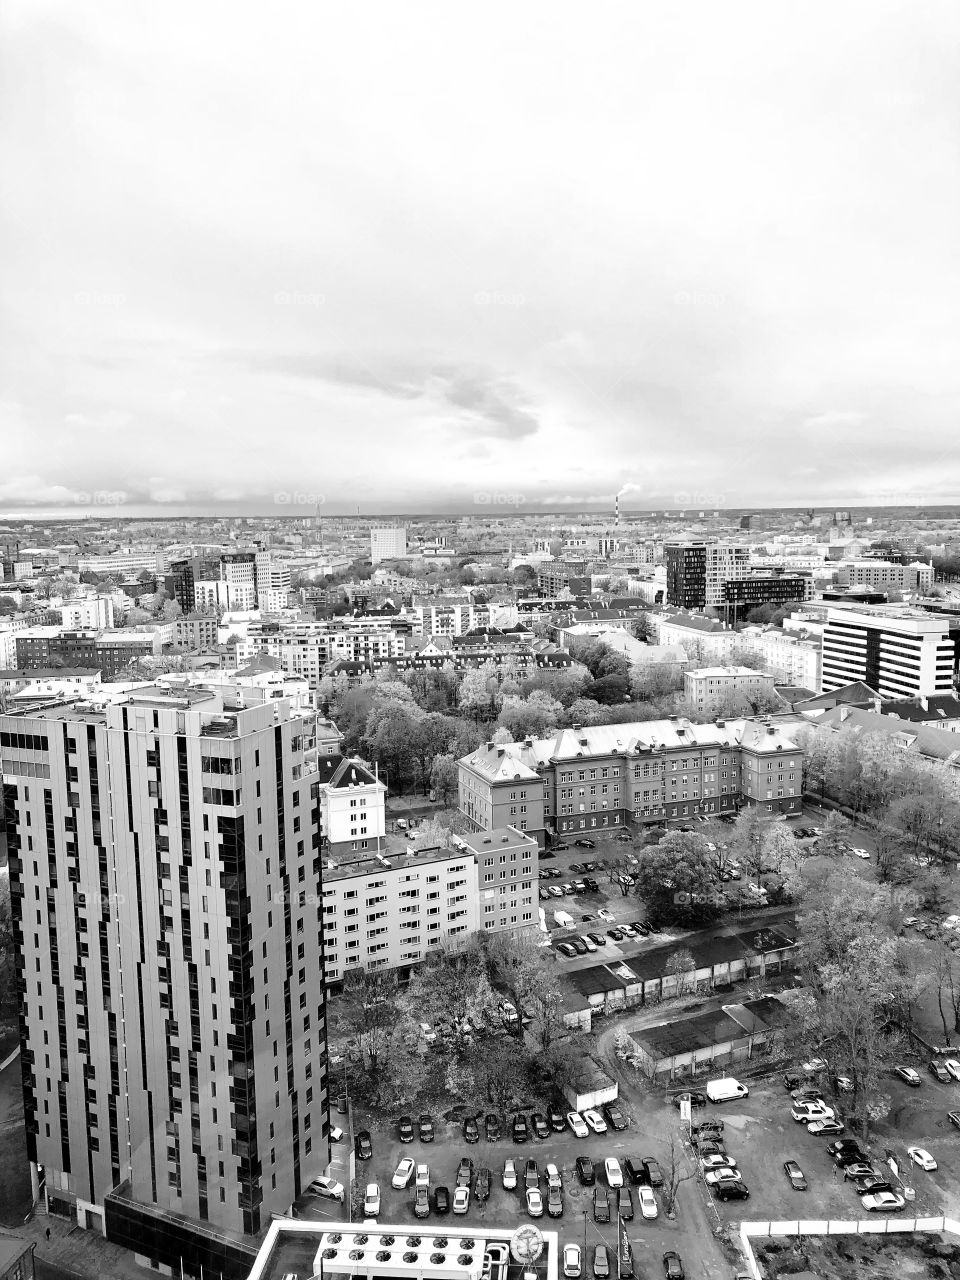 A beautiful black and white view over the city 